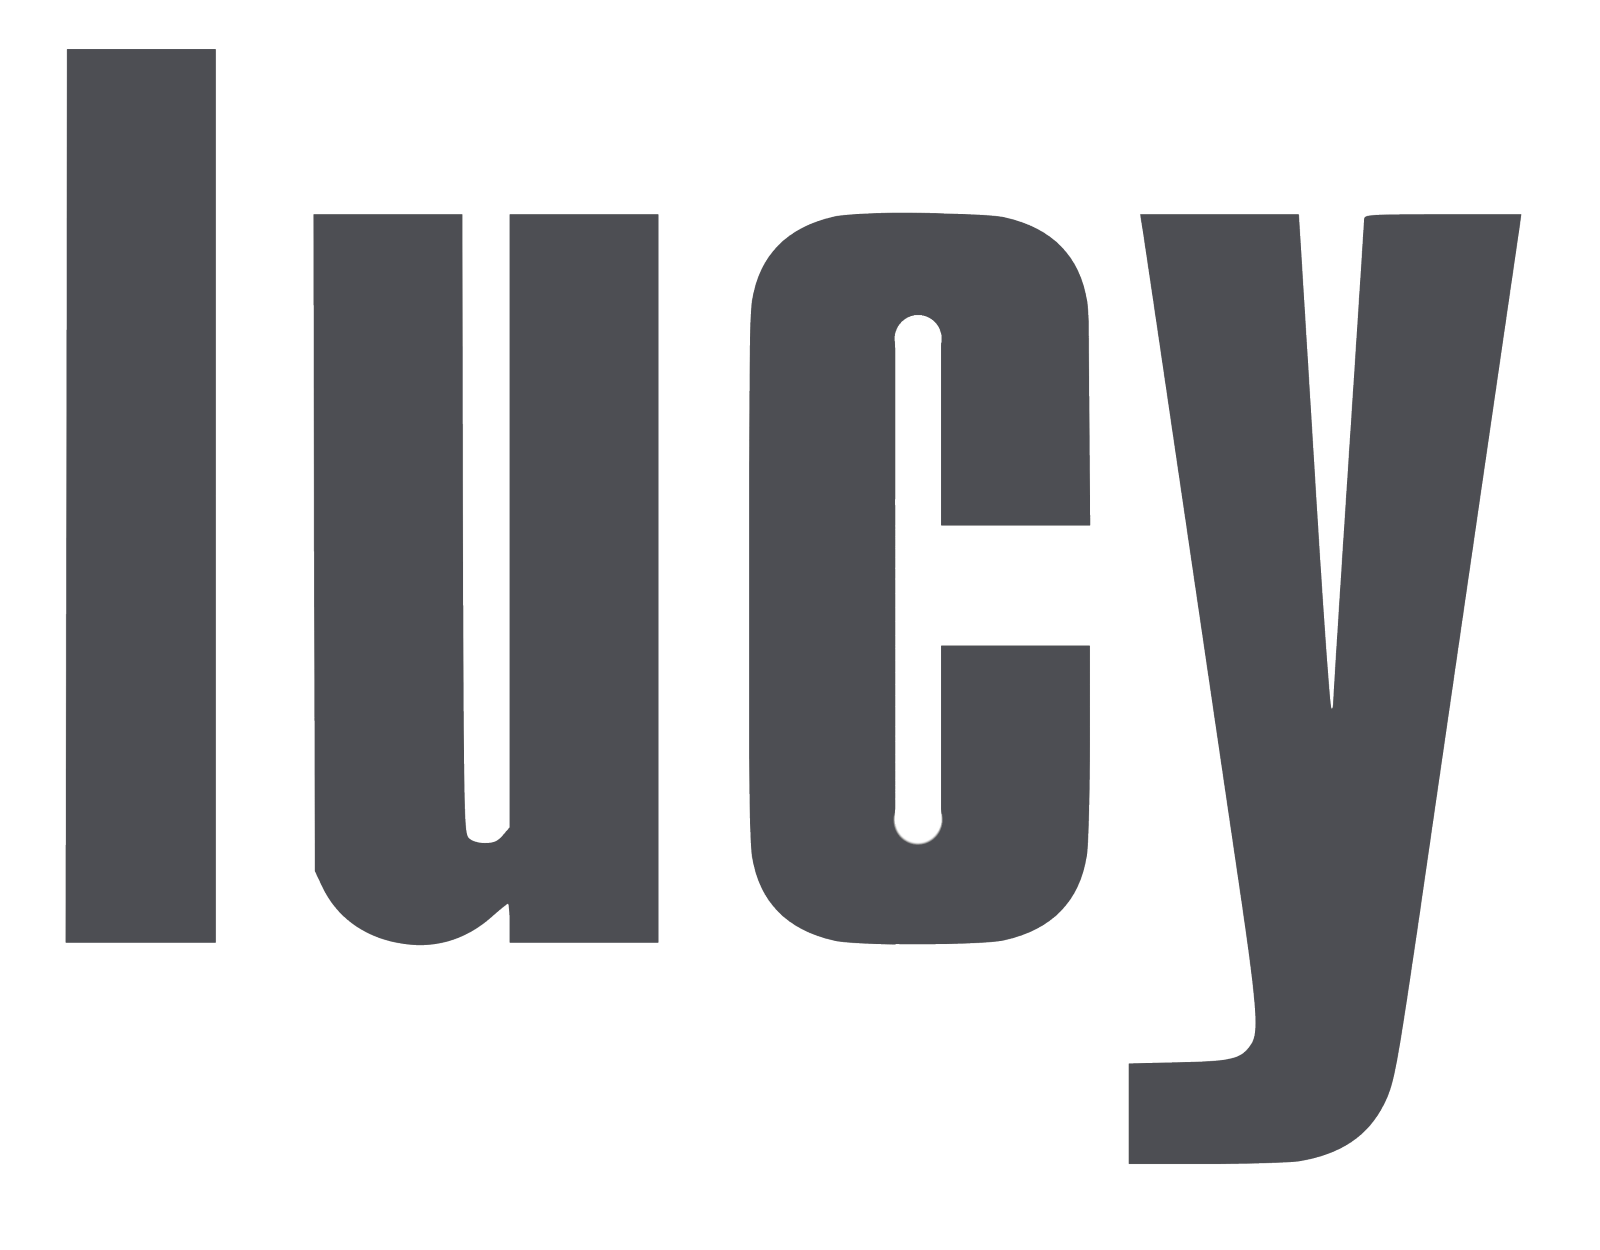 lucy_logo_gray.png